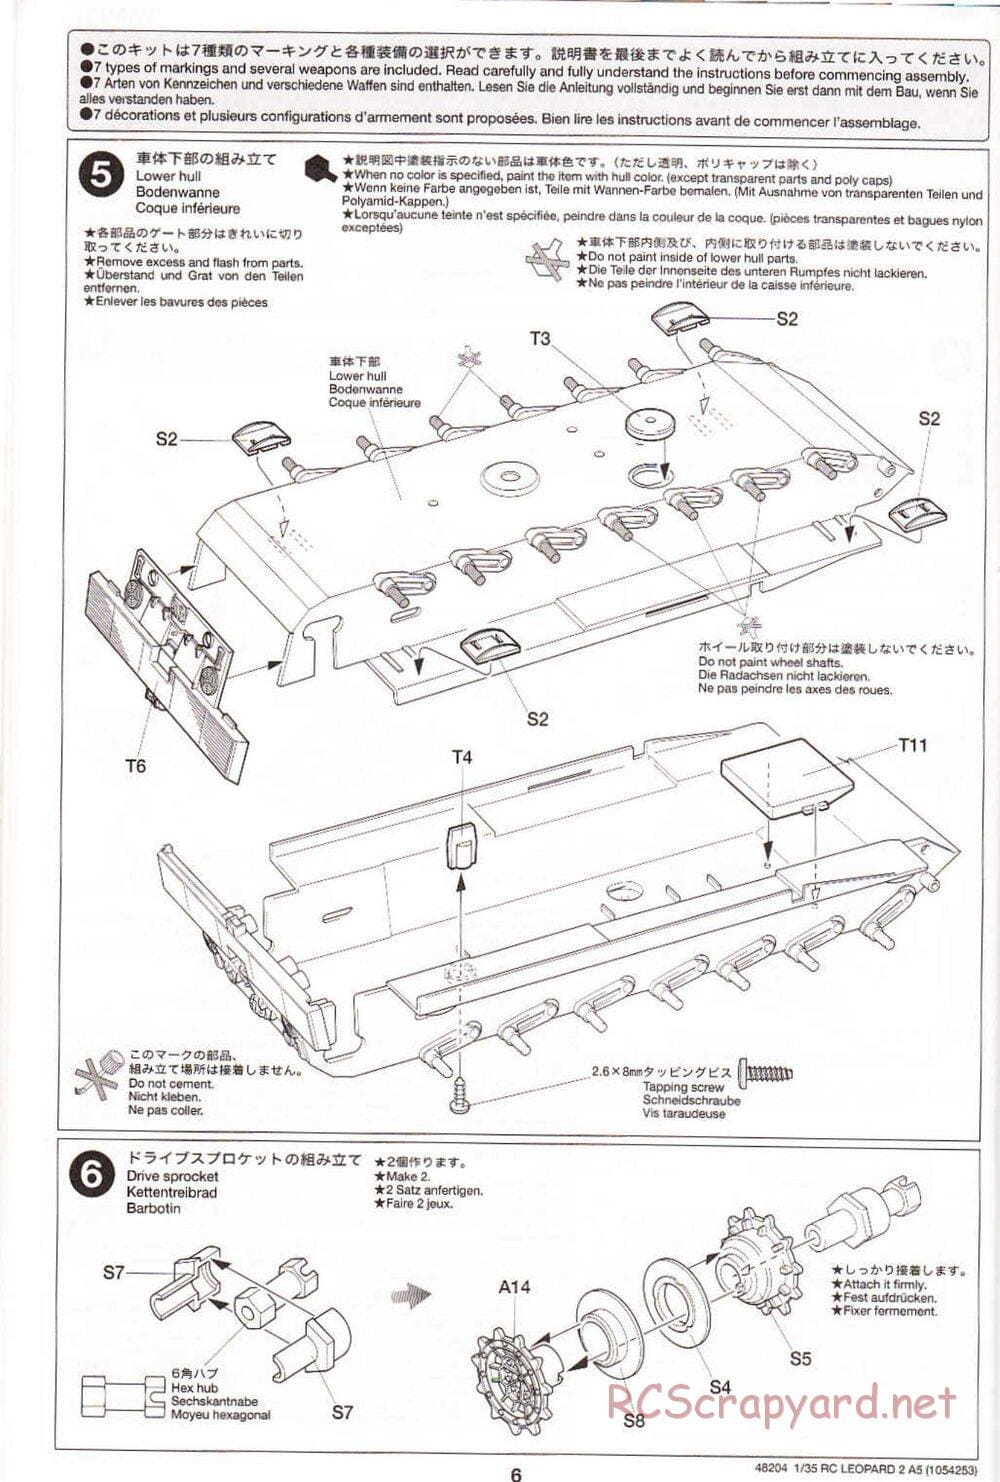 Tamiya - Leopard 2 A5 Main Battle Tank - 1/35 Scale Chassis - Manual - Page 6